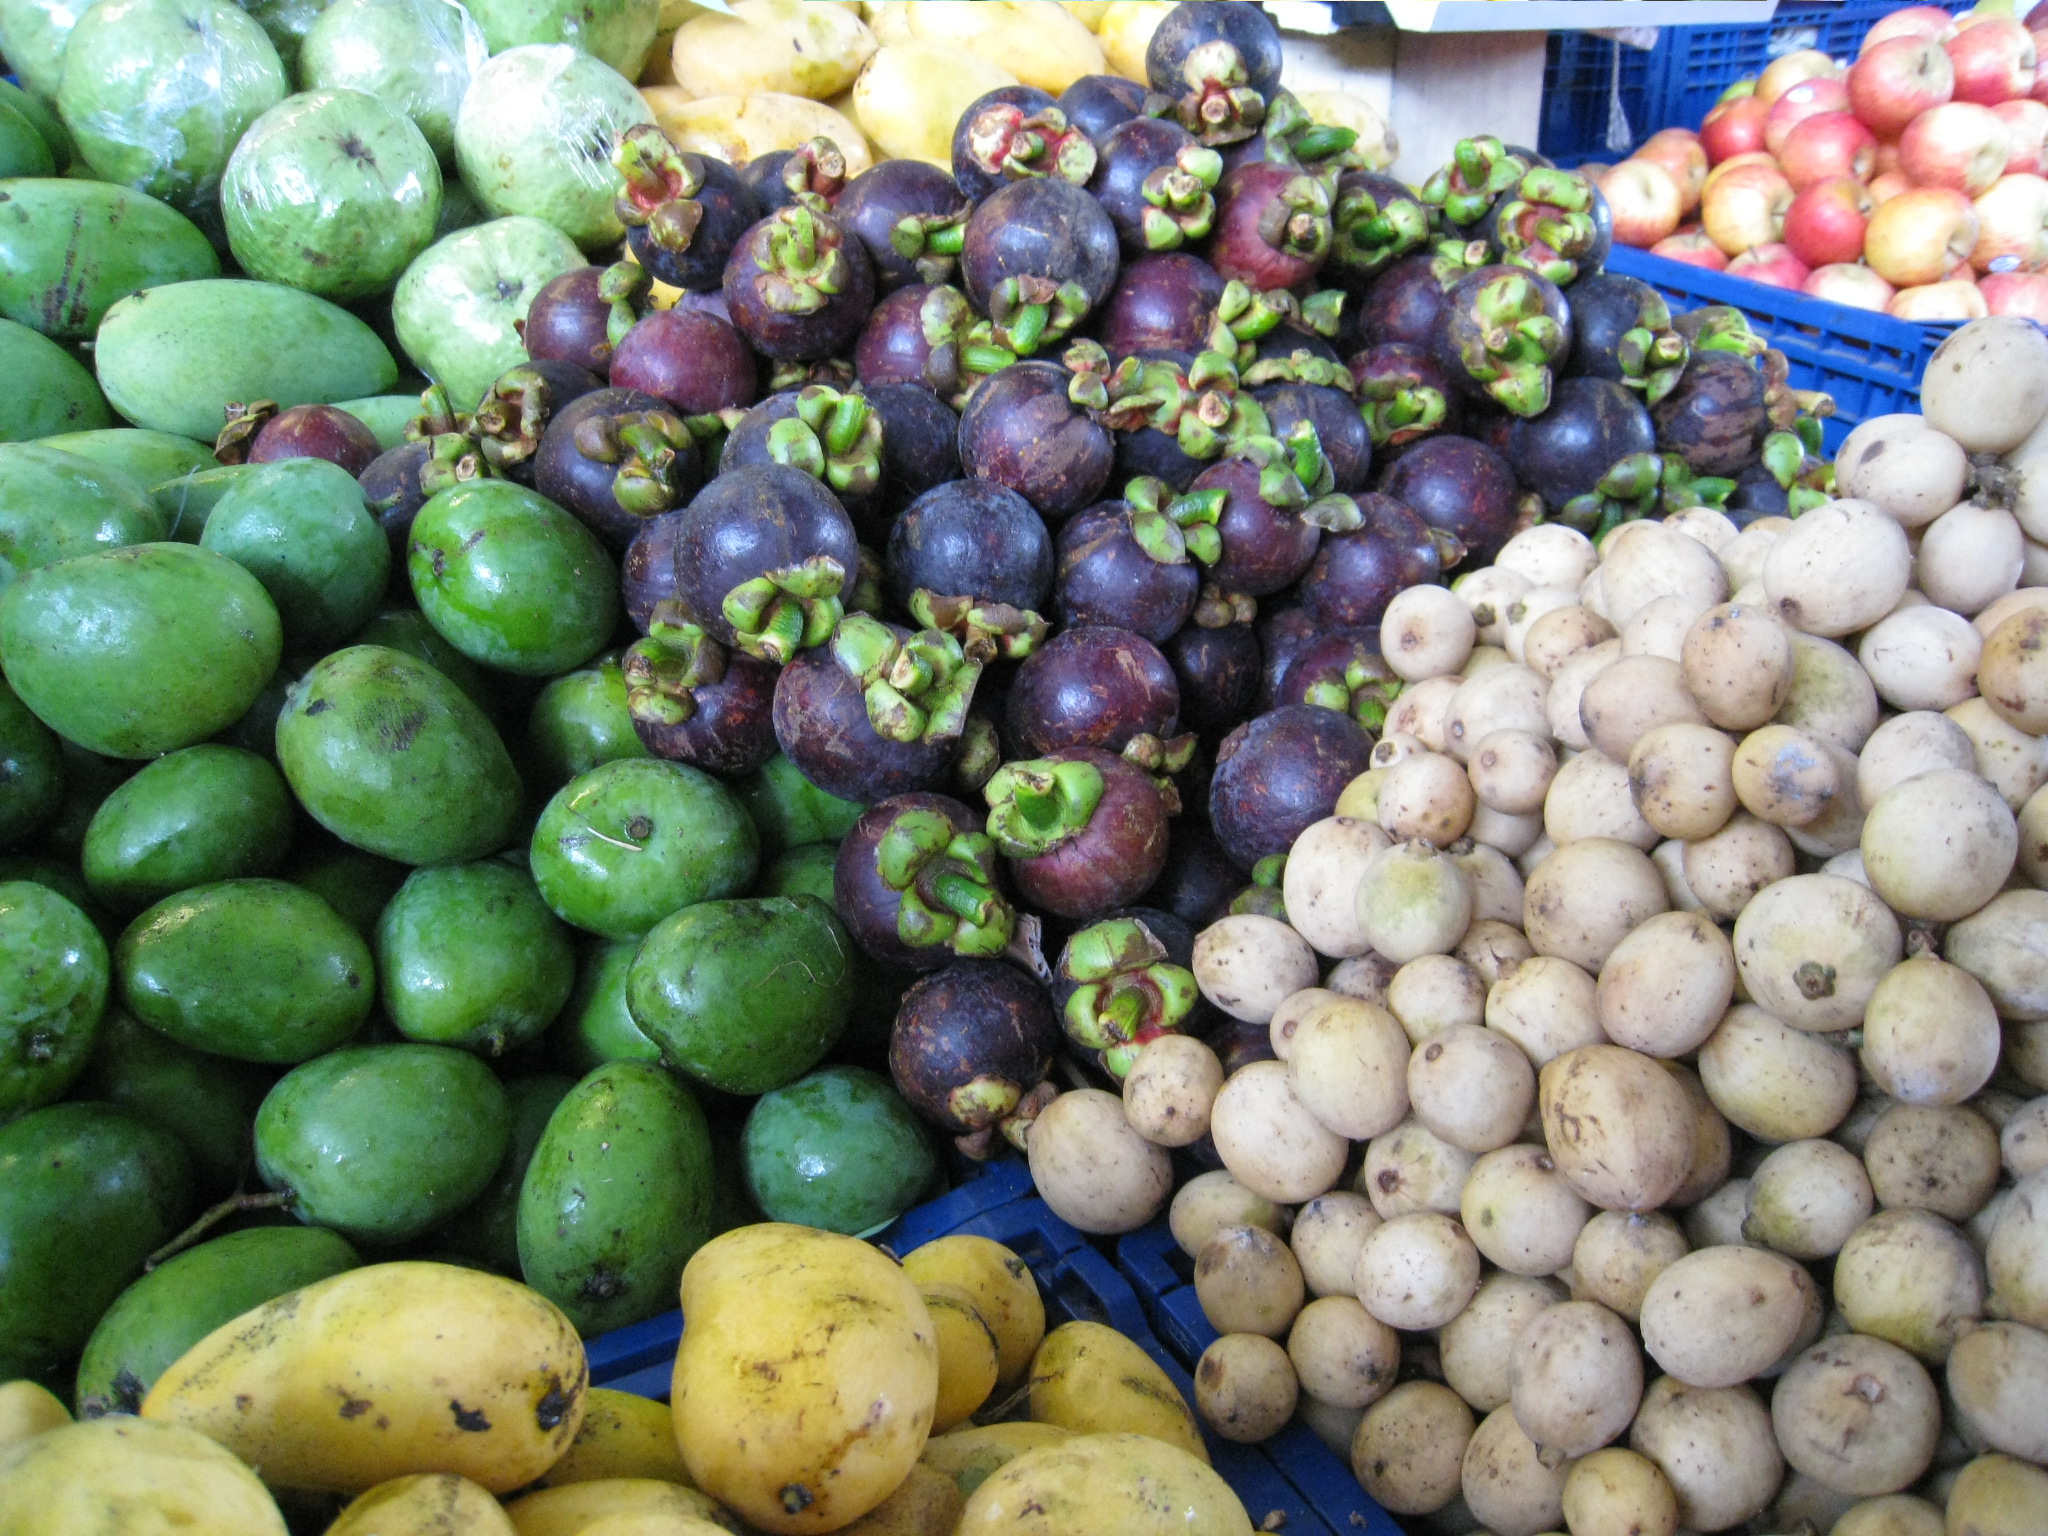 many types of fruits displayed at an outdoor market